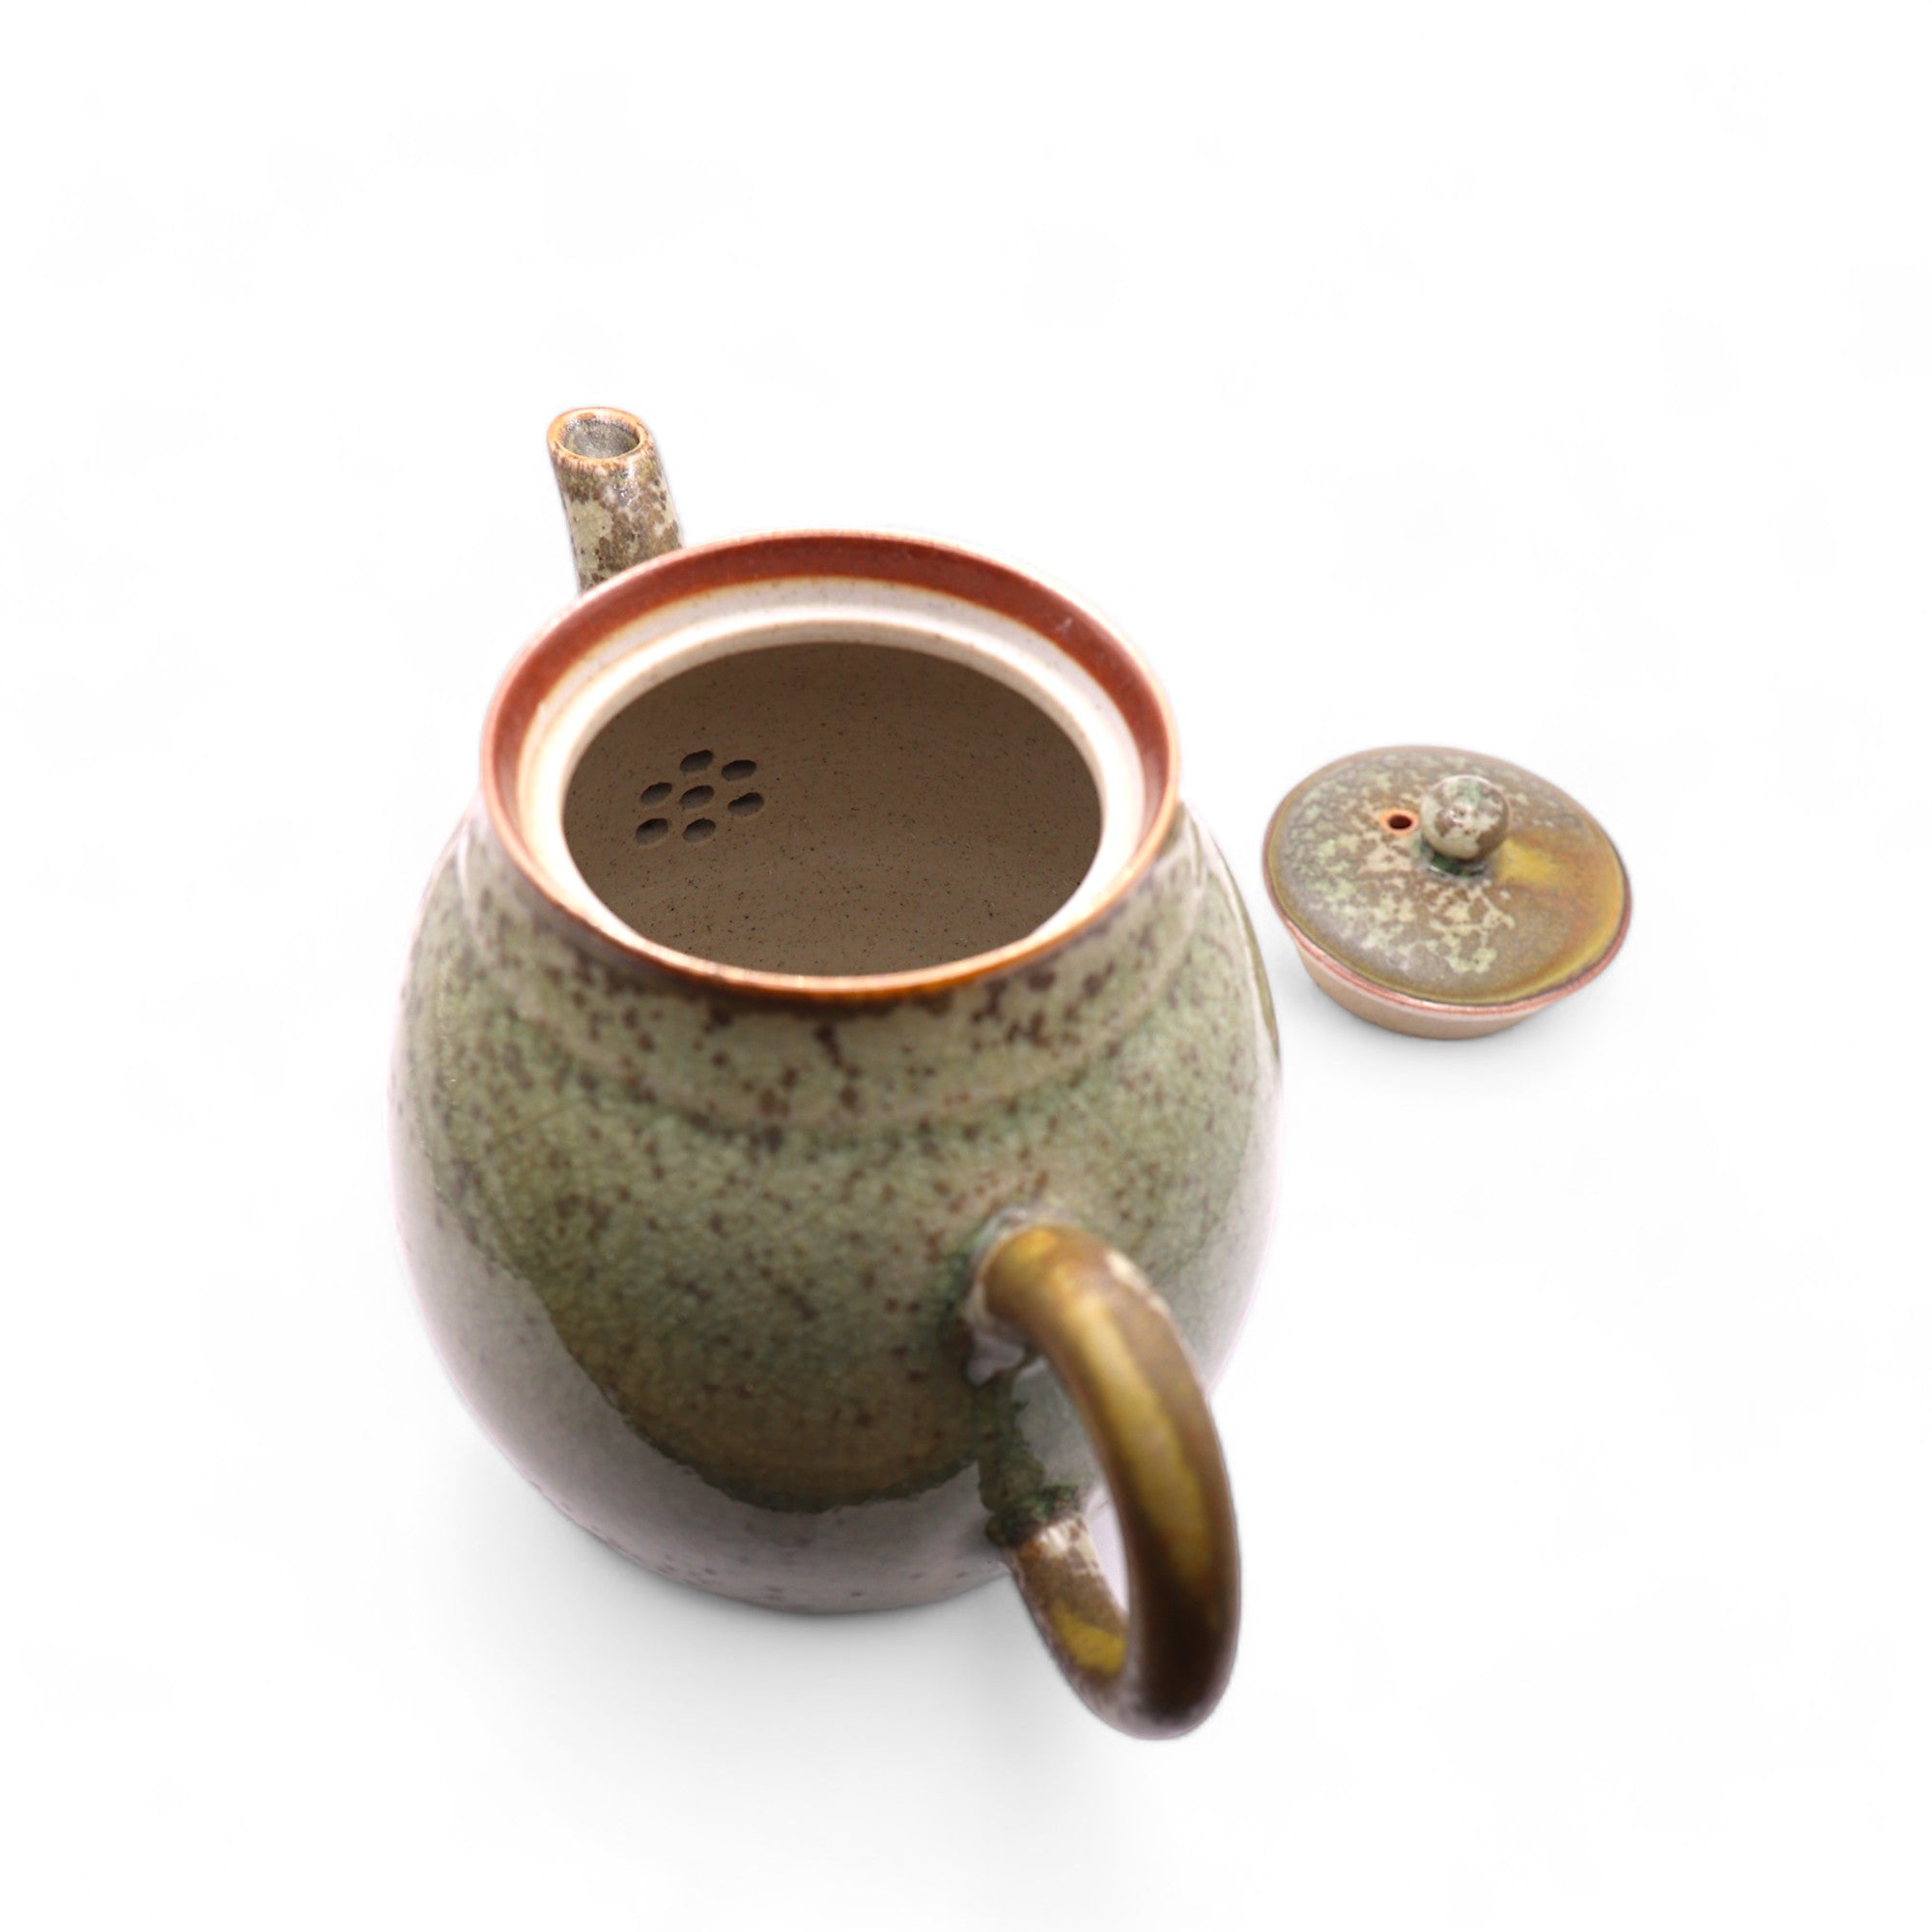 Wood-fired Teapot (Ancient Charm)